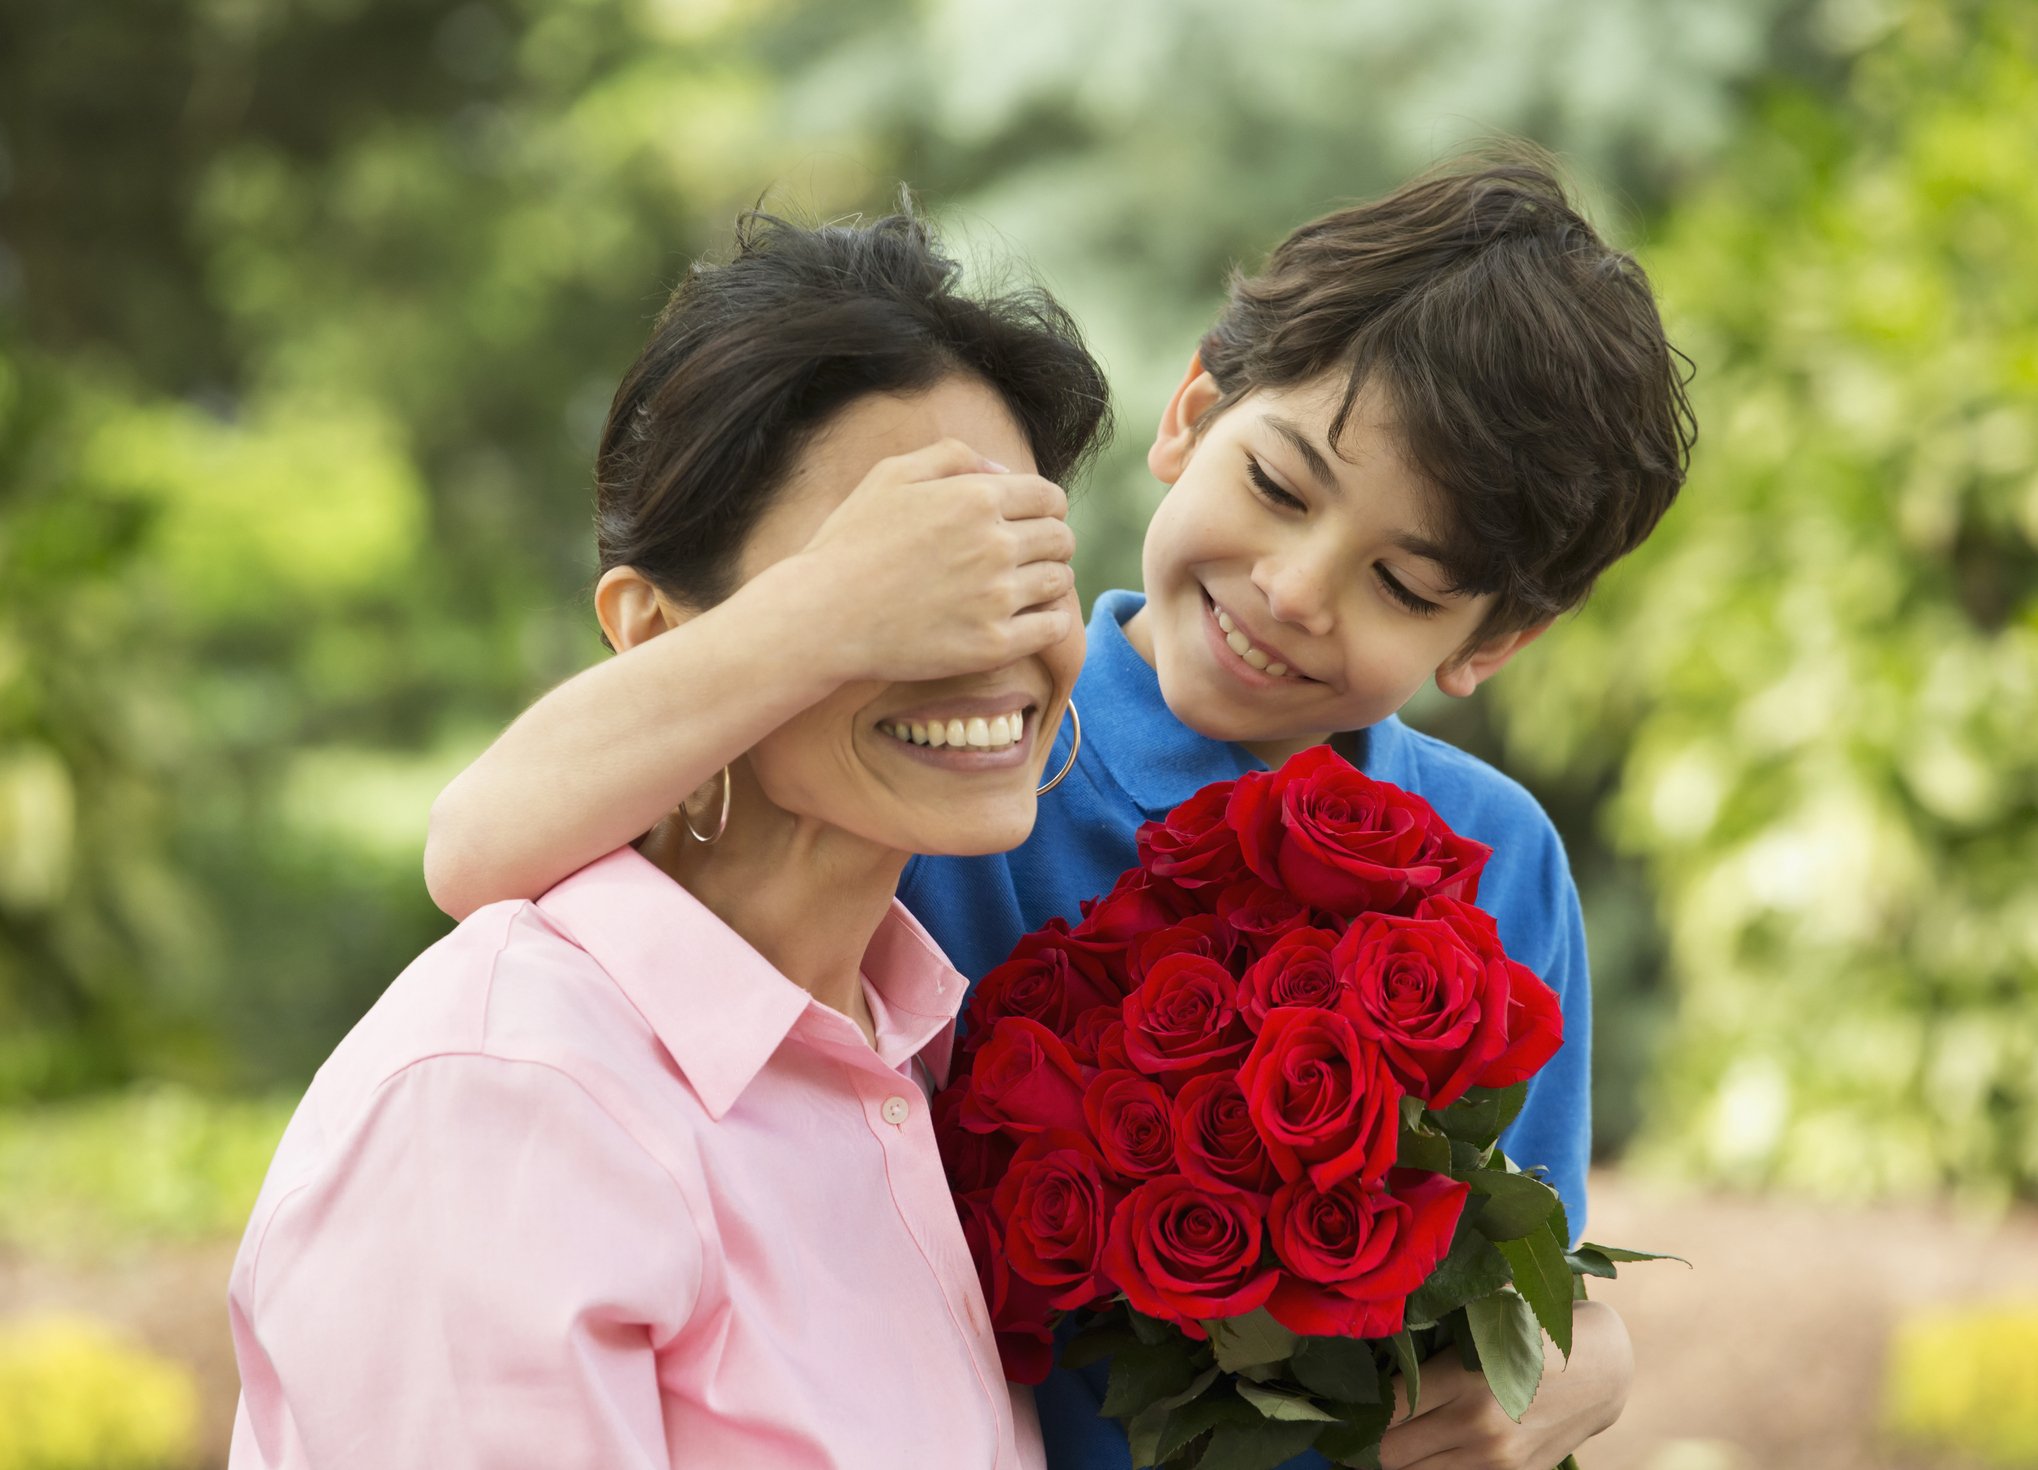 Hispanic boy giving mother bouquet of roses | Photo: Getty Images